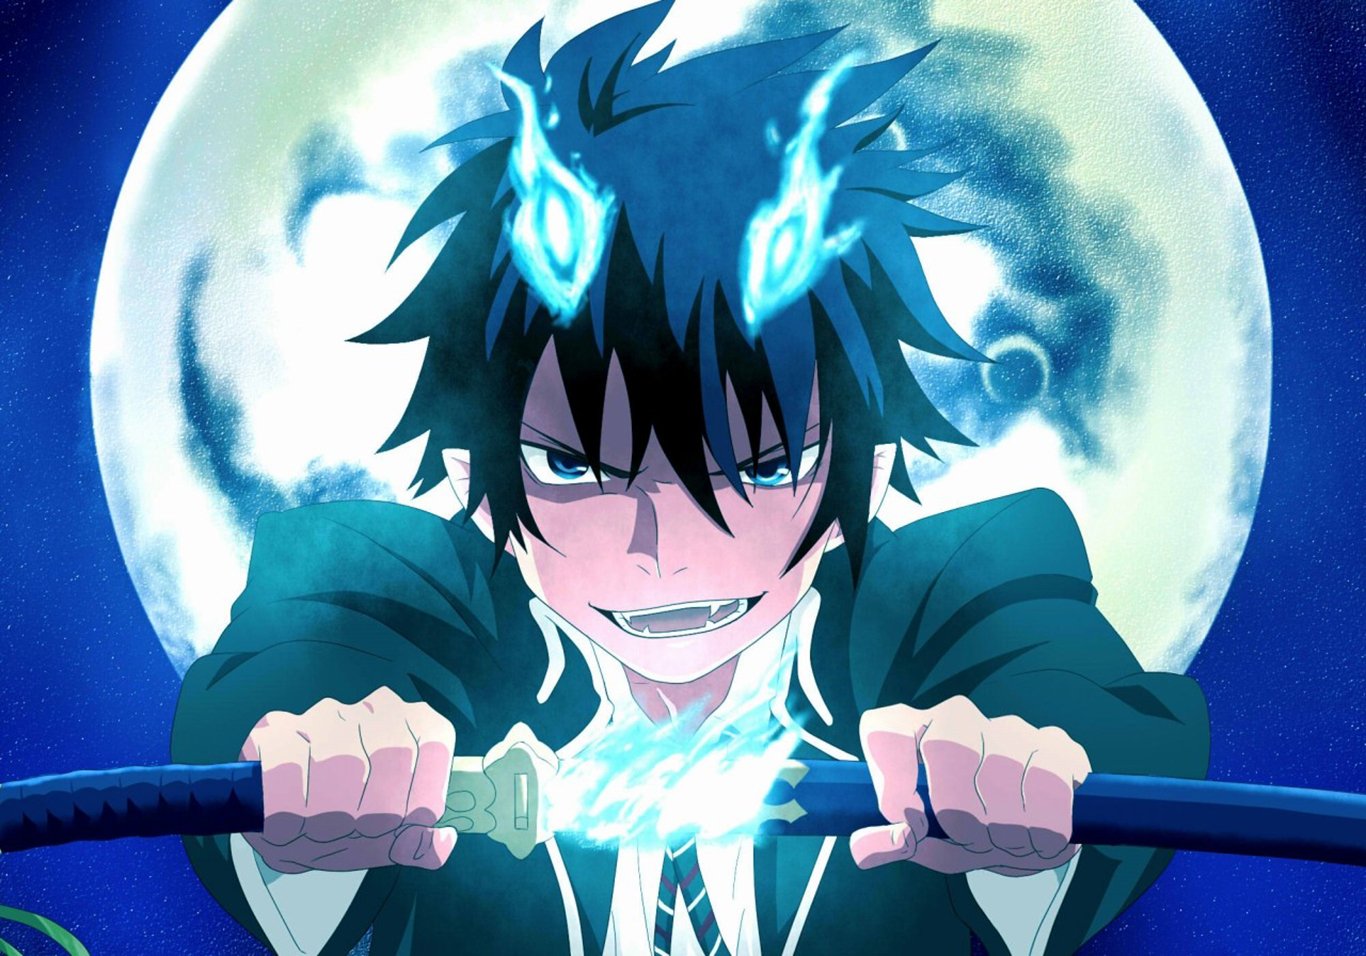 6. "Rin Okumura from Blue Exorcist" - wide 3